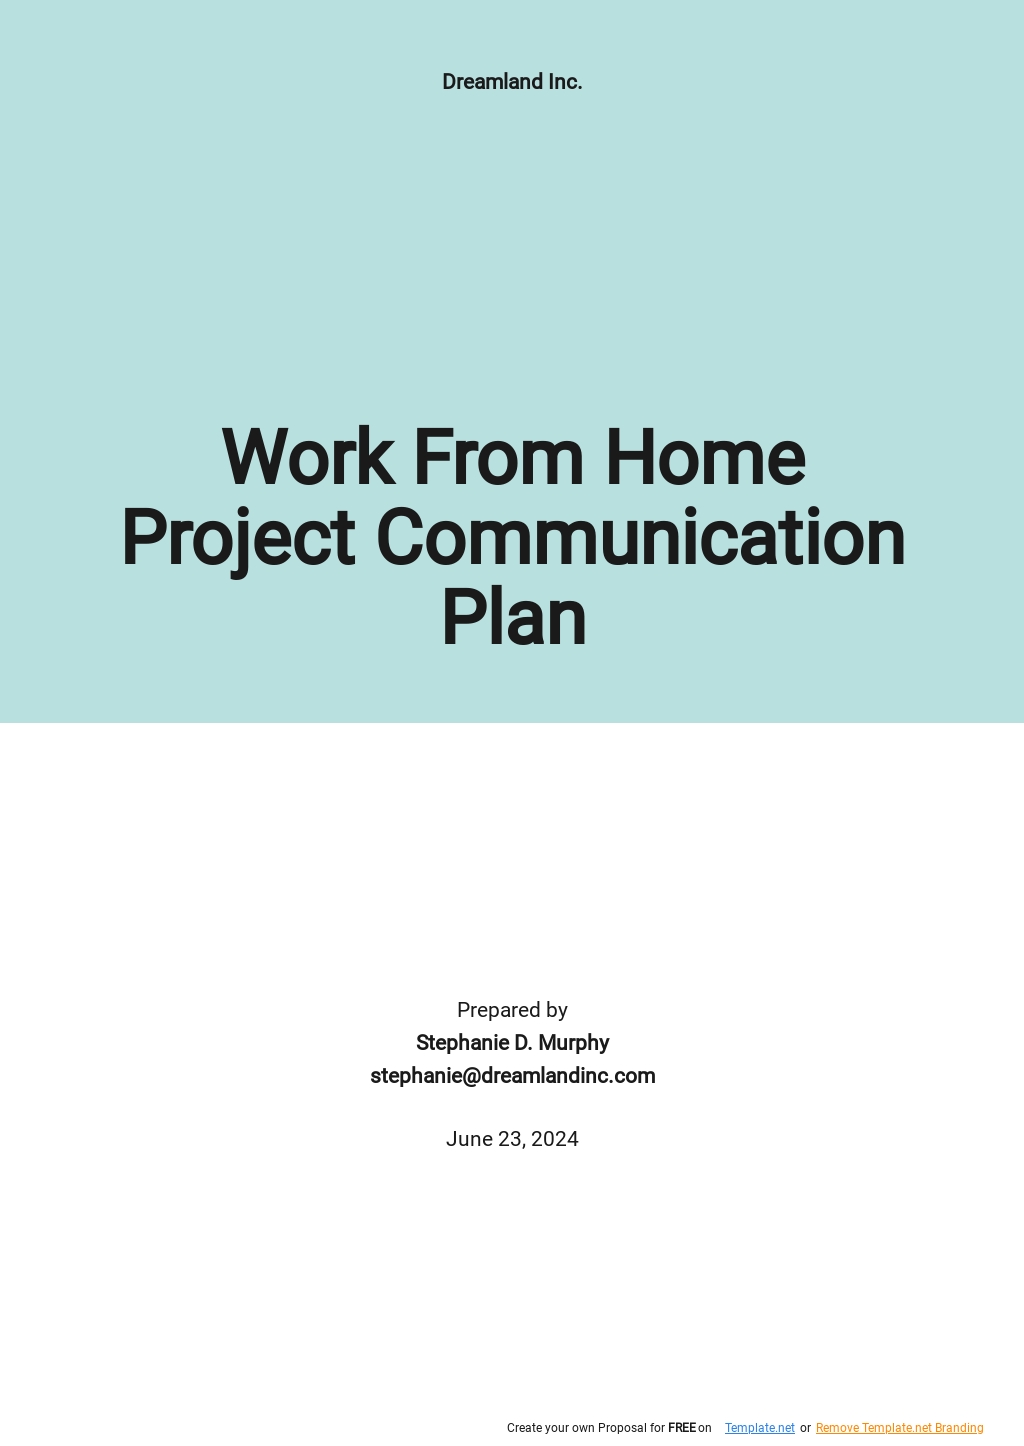 Work From Home Project Communication Plan Template.jpe